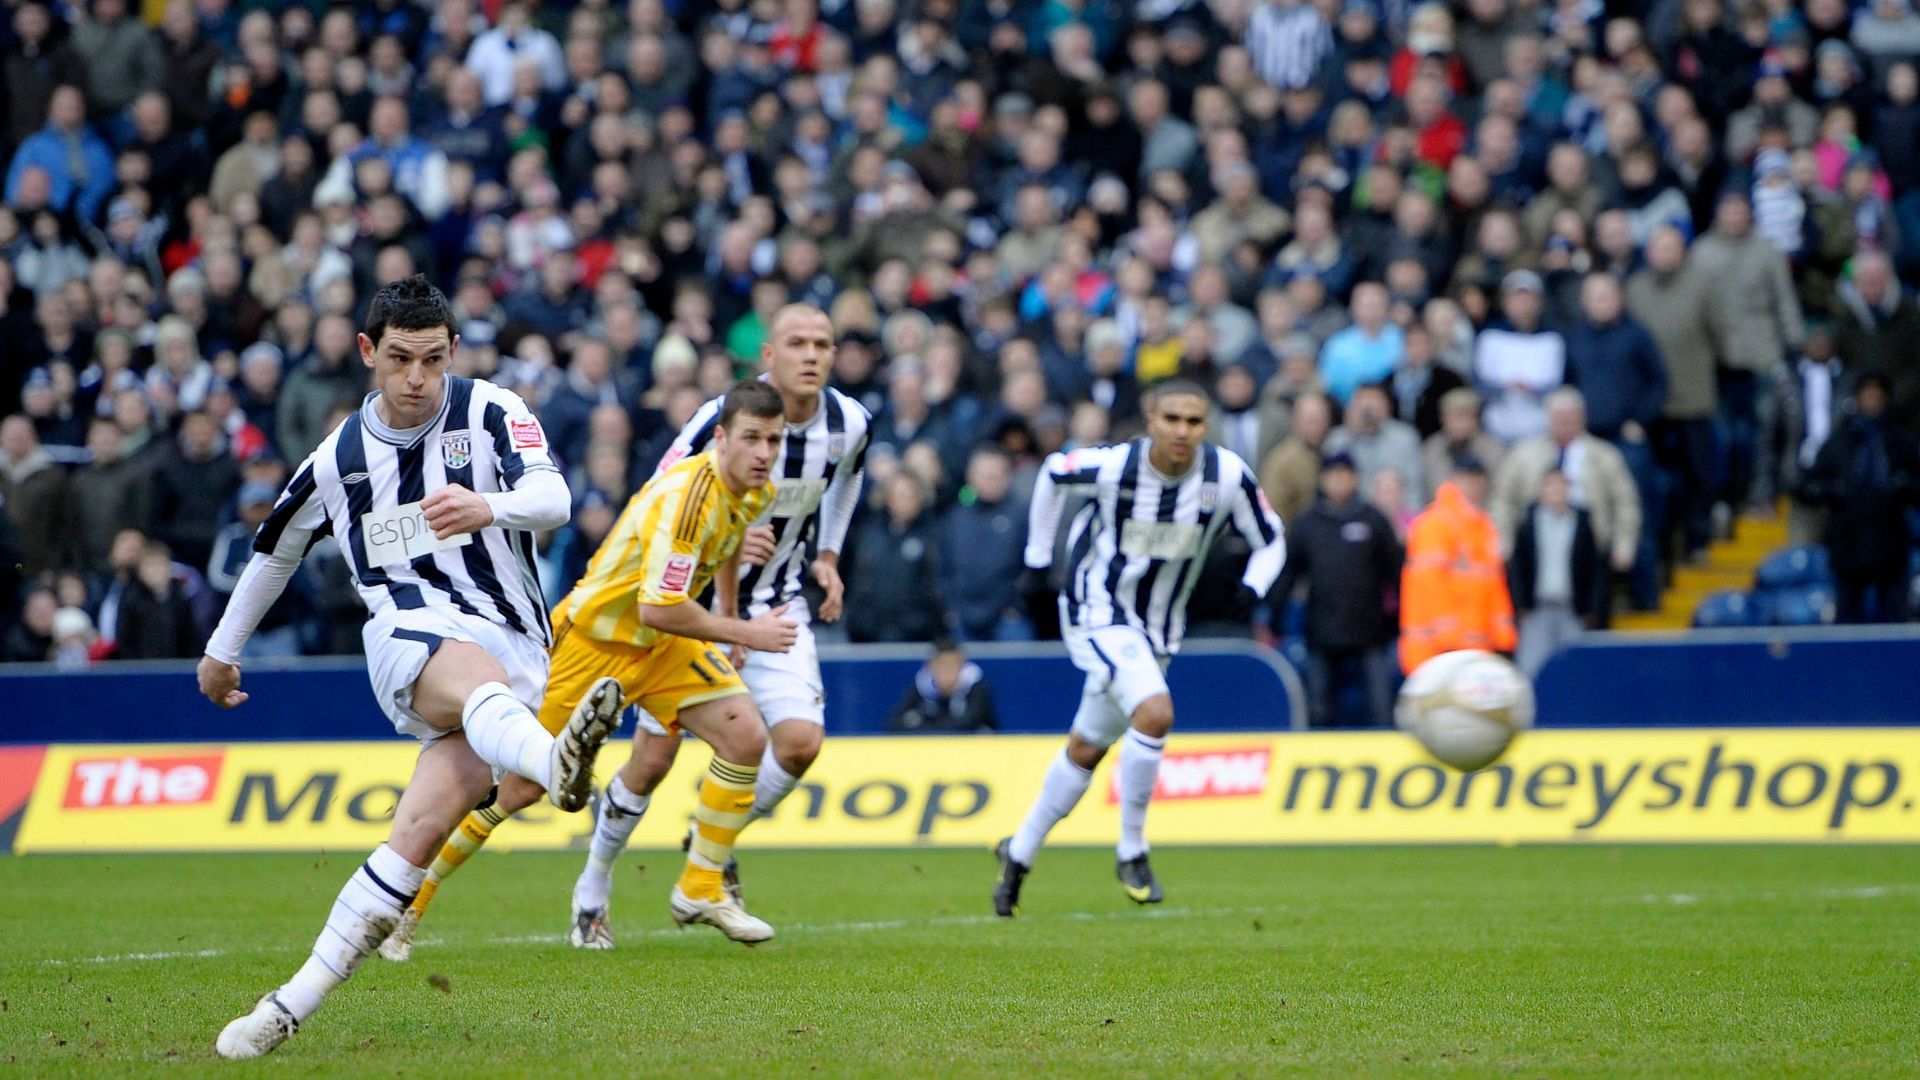 Graham Dorrans playing for West Bromwich Albion